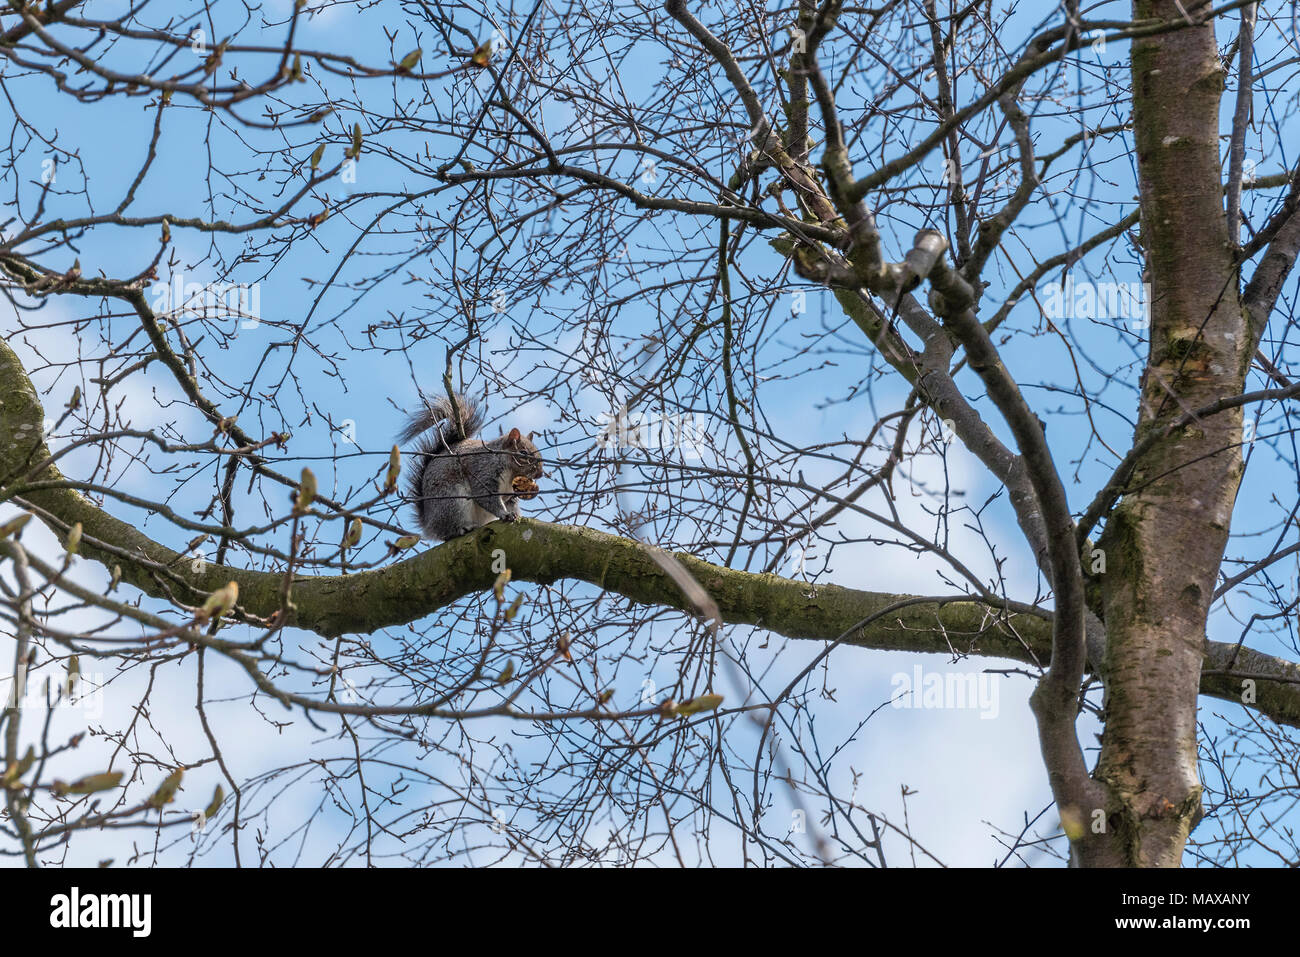 Squirrel in tree branches Stock Photo